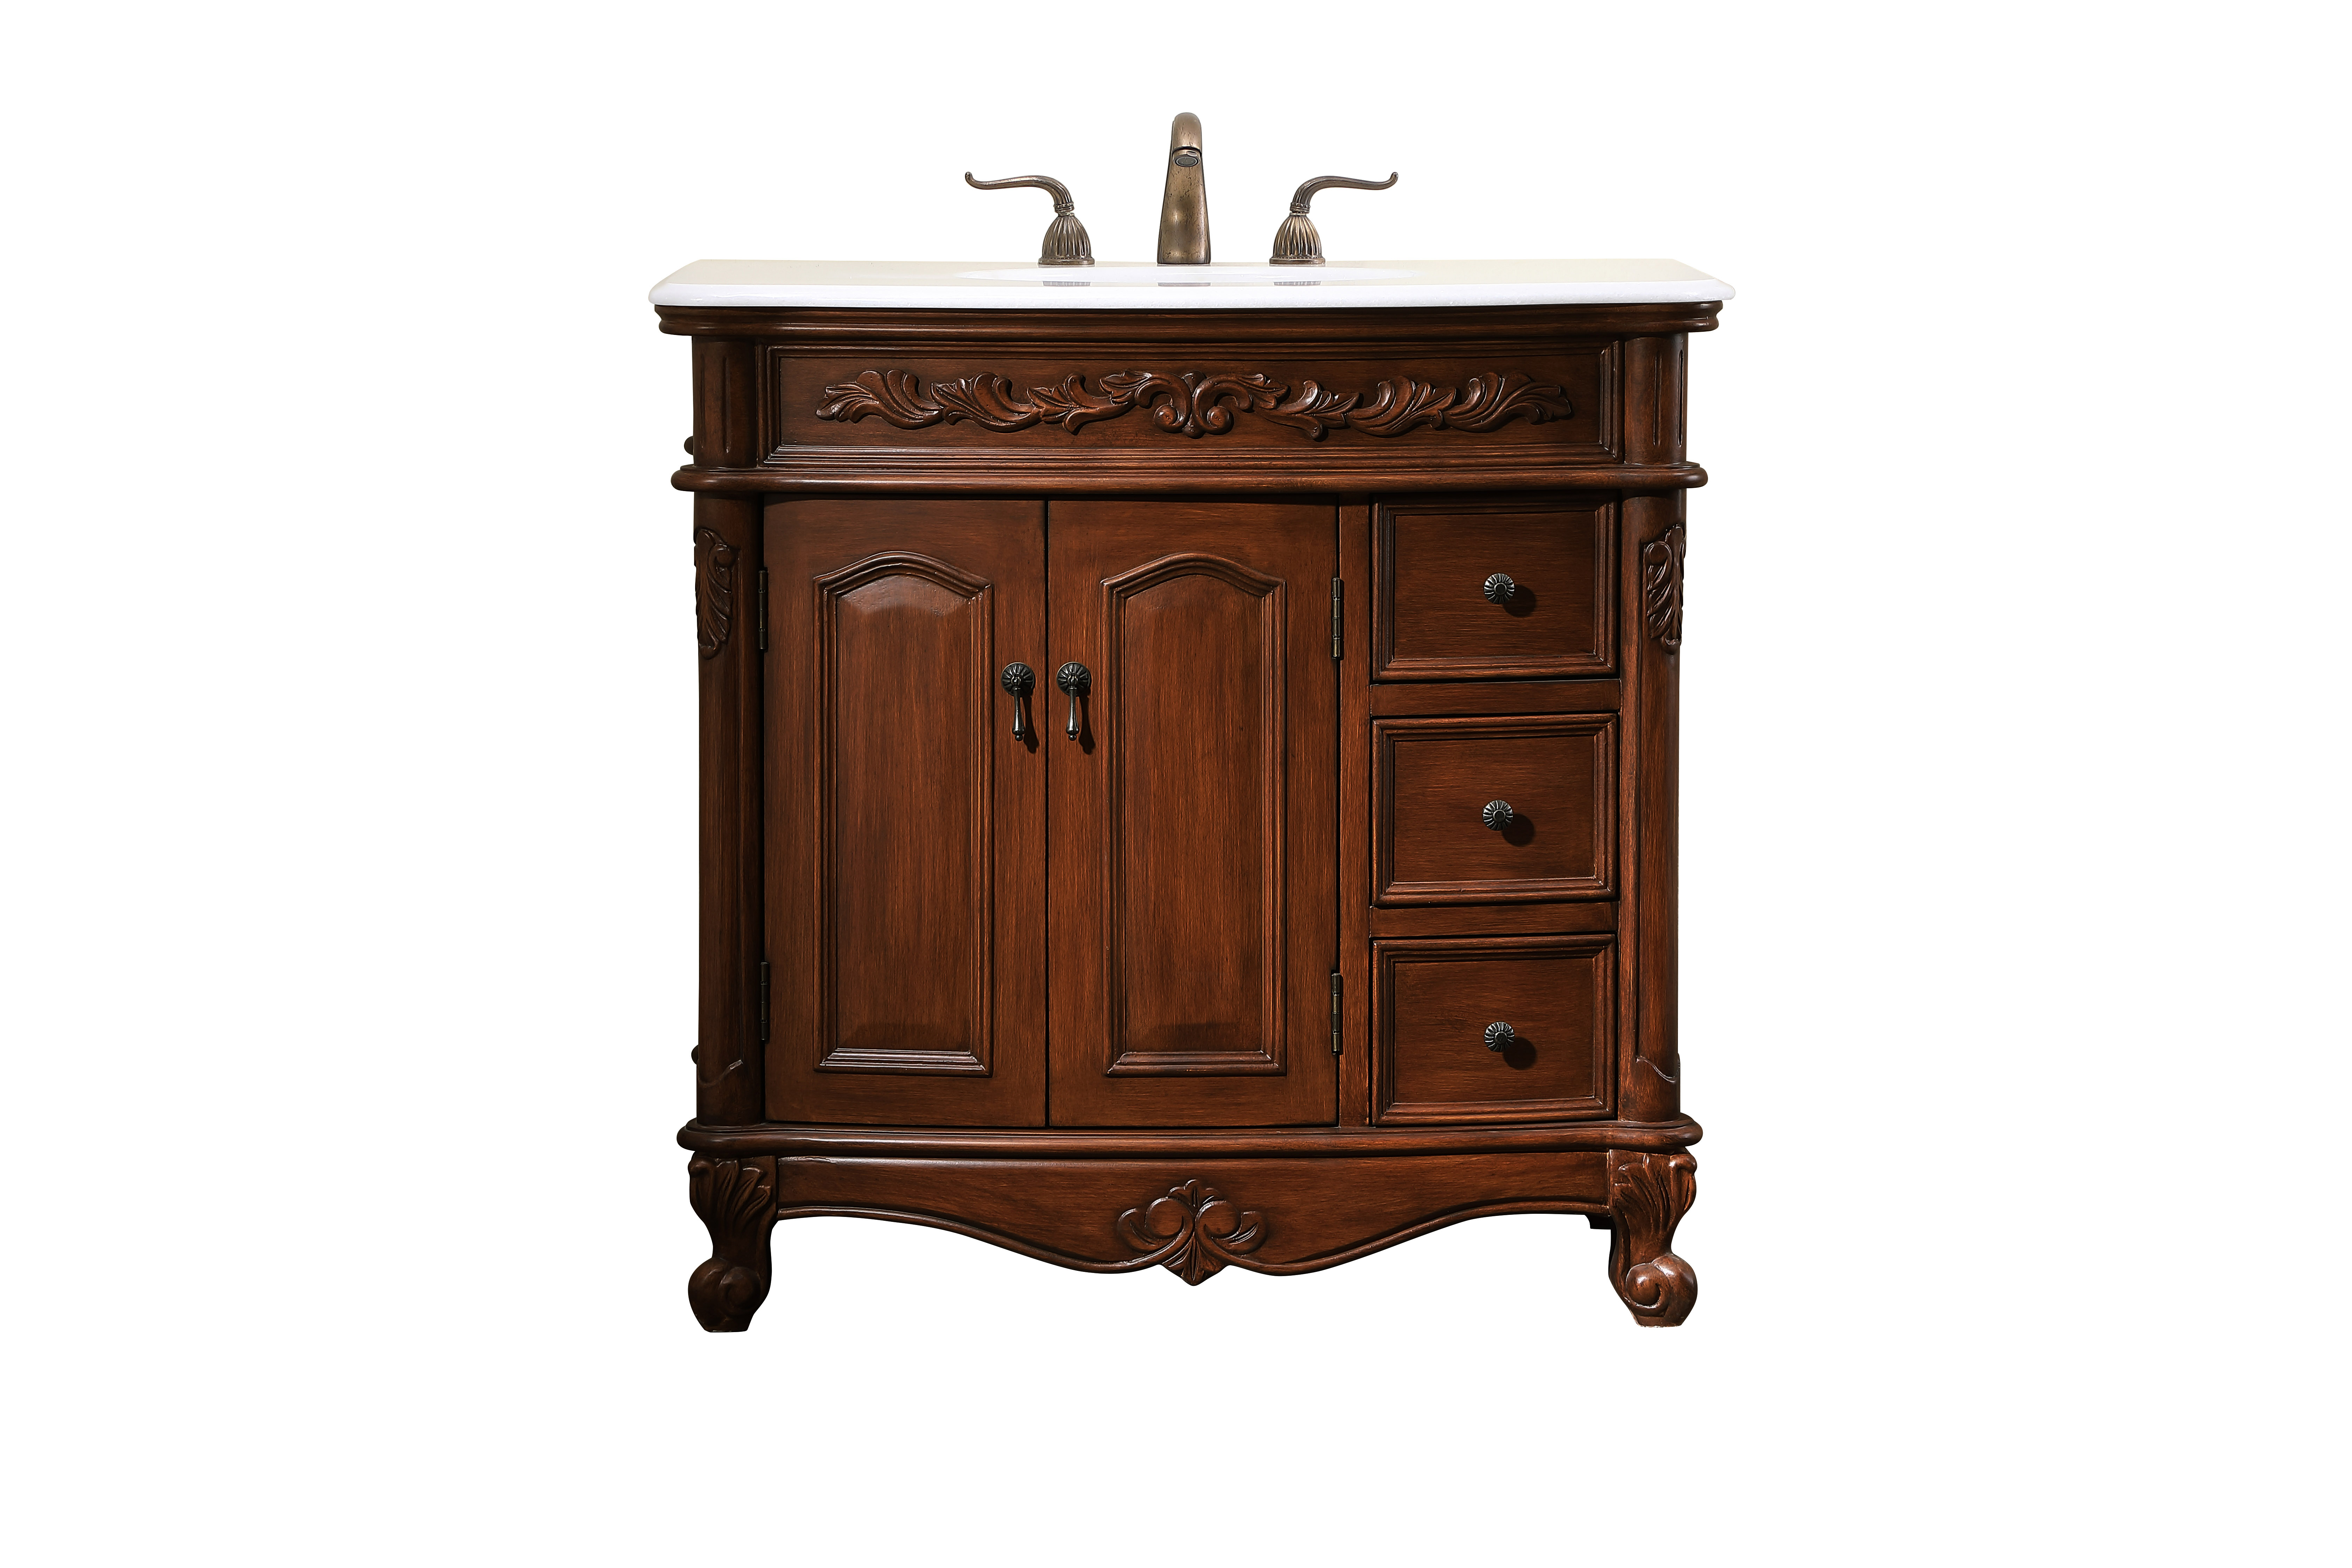 36" Deep Chestnut Finish Vanity Victorian Style Leg with White Imperial Marble Top